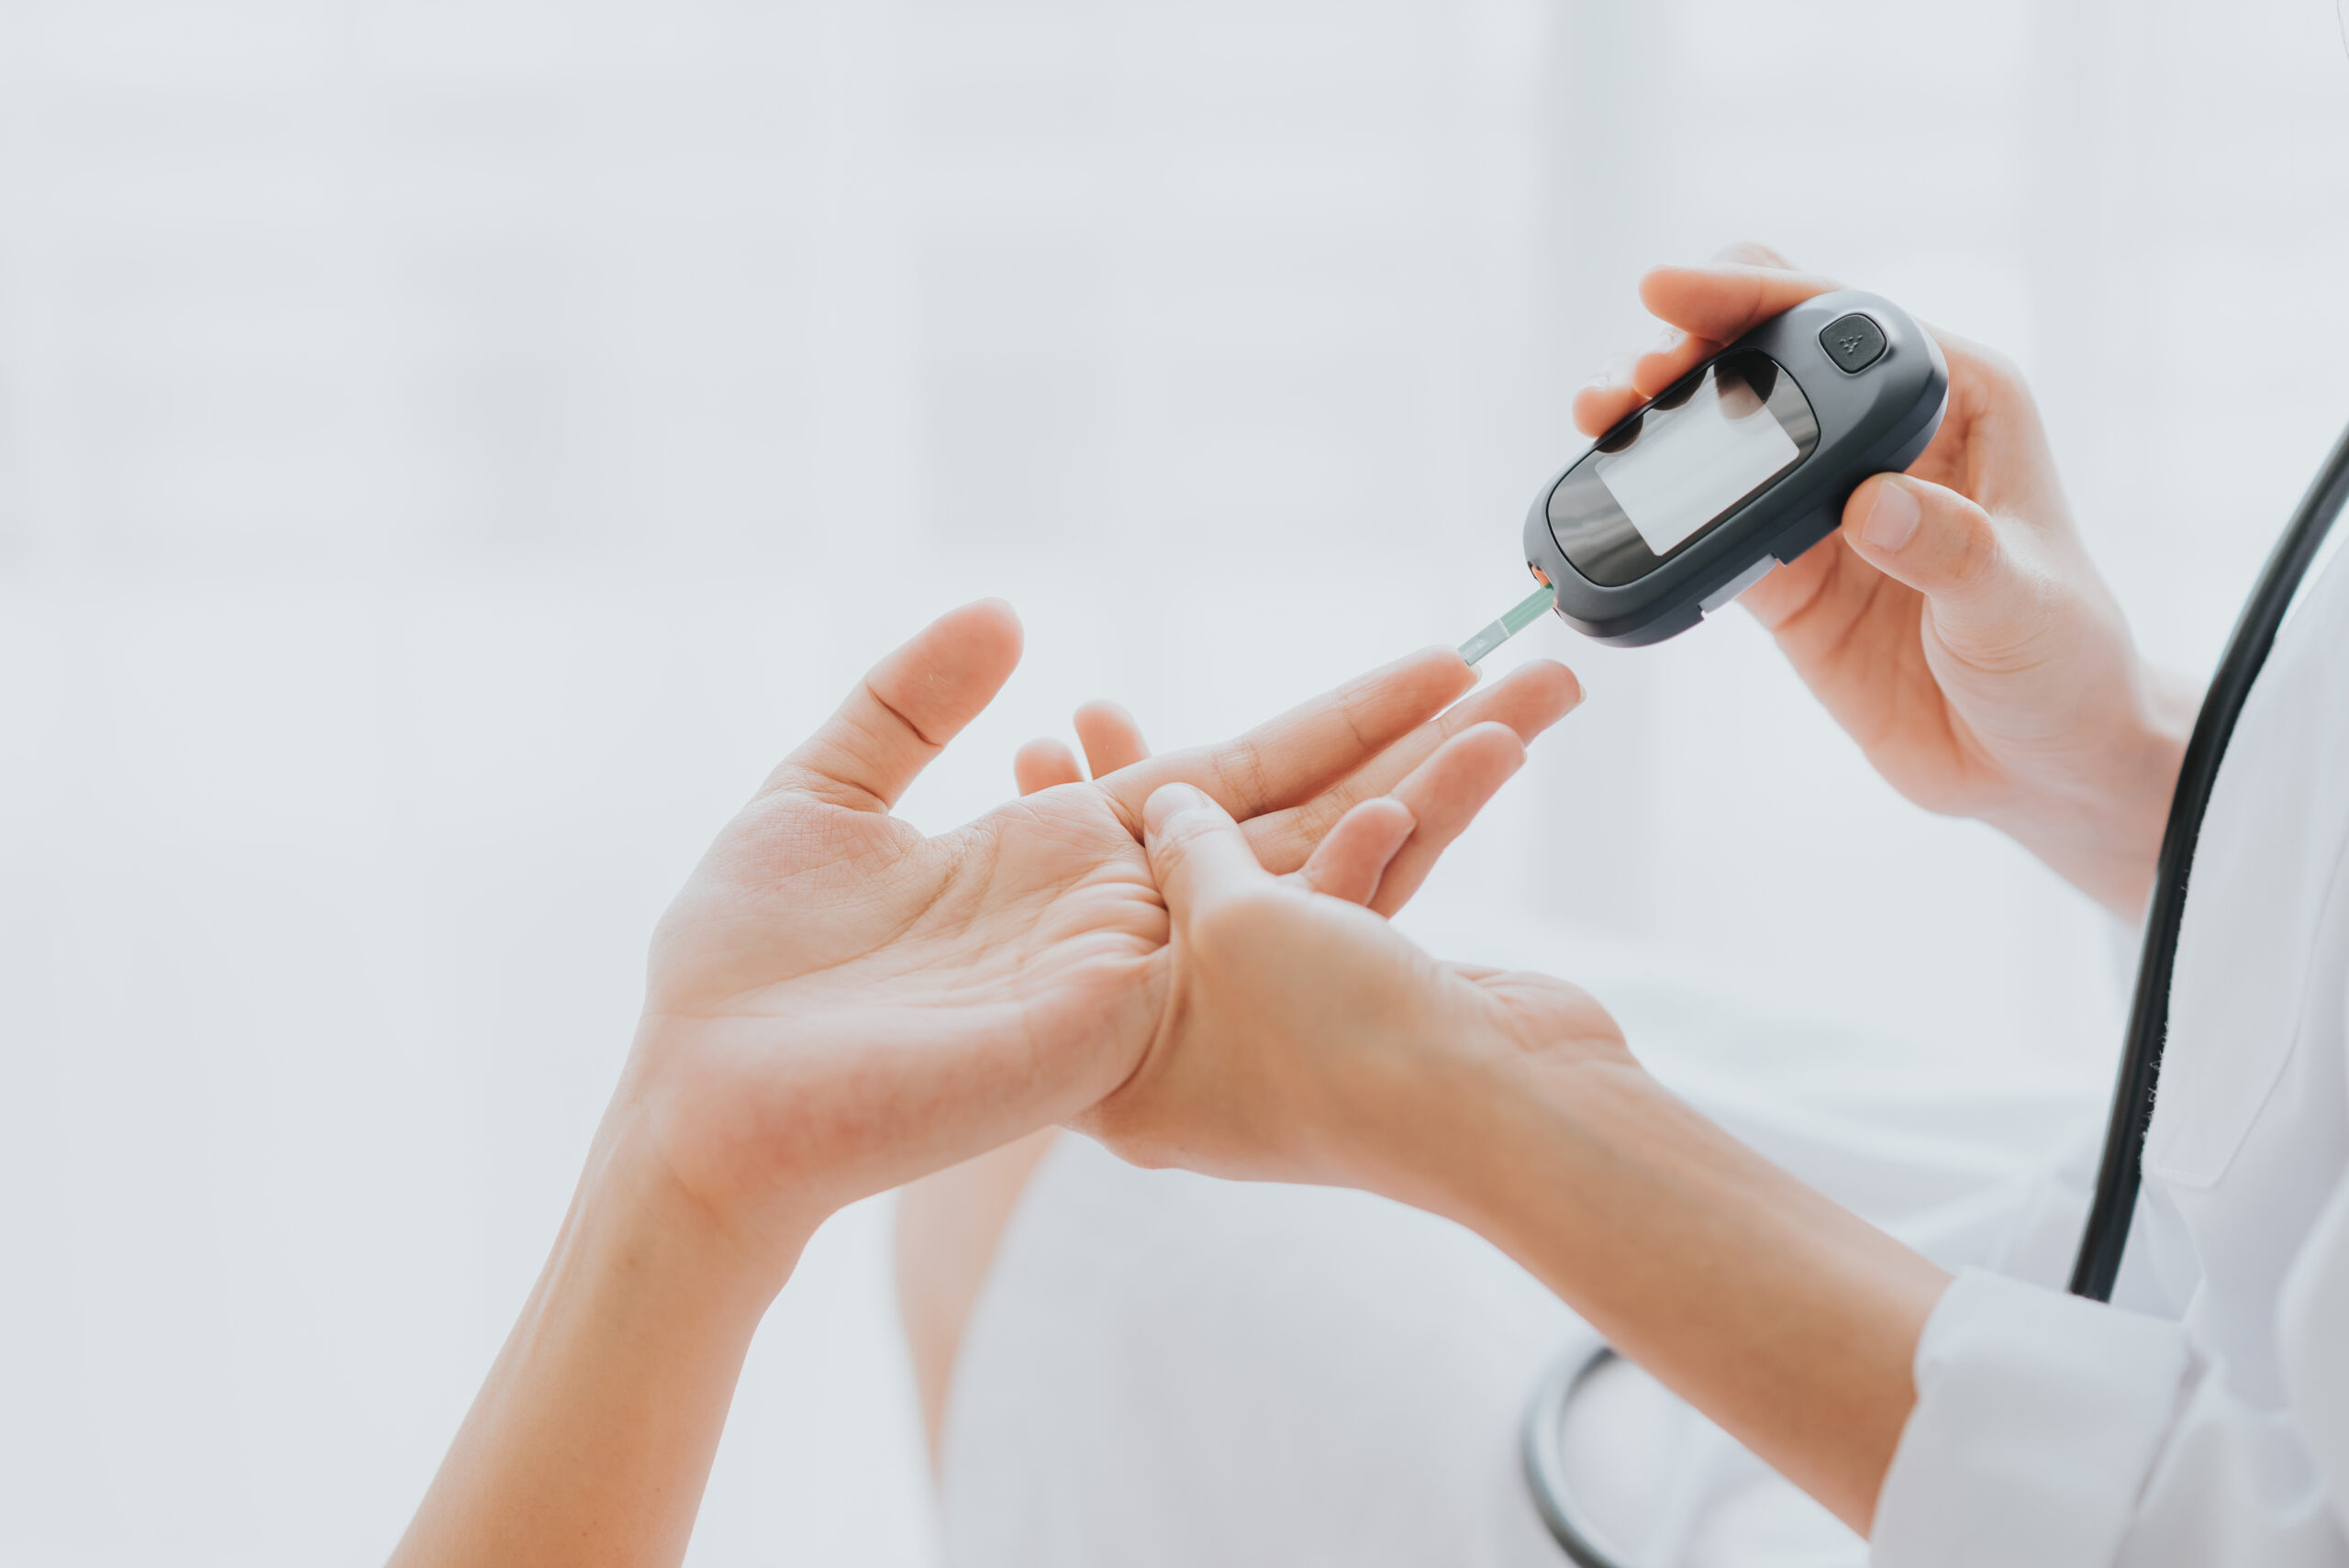 Diabetes impacts your life and can cause other major medical concerns. Functional nutritionists can help balance so you need to worry less about your blood sugar levels